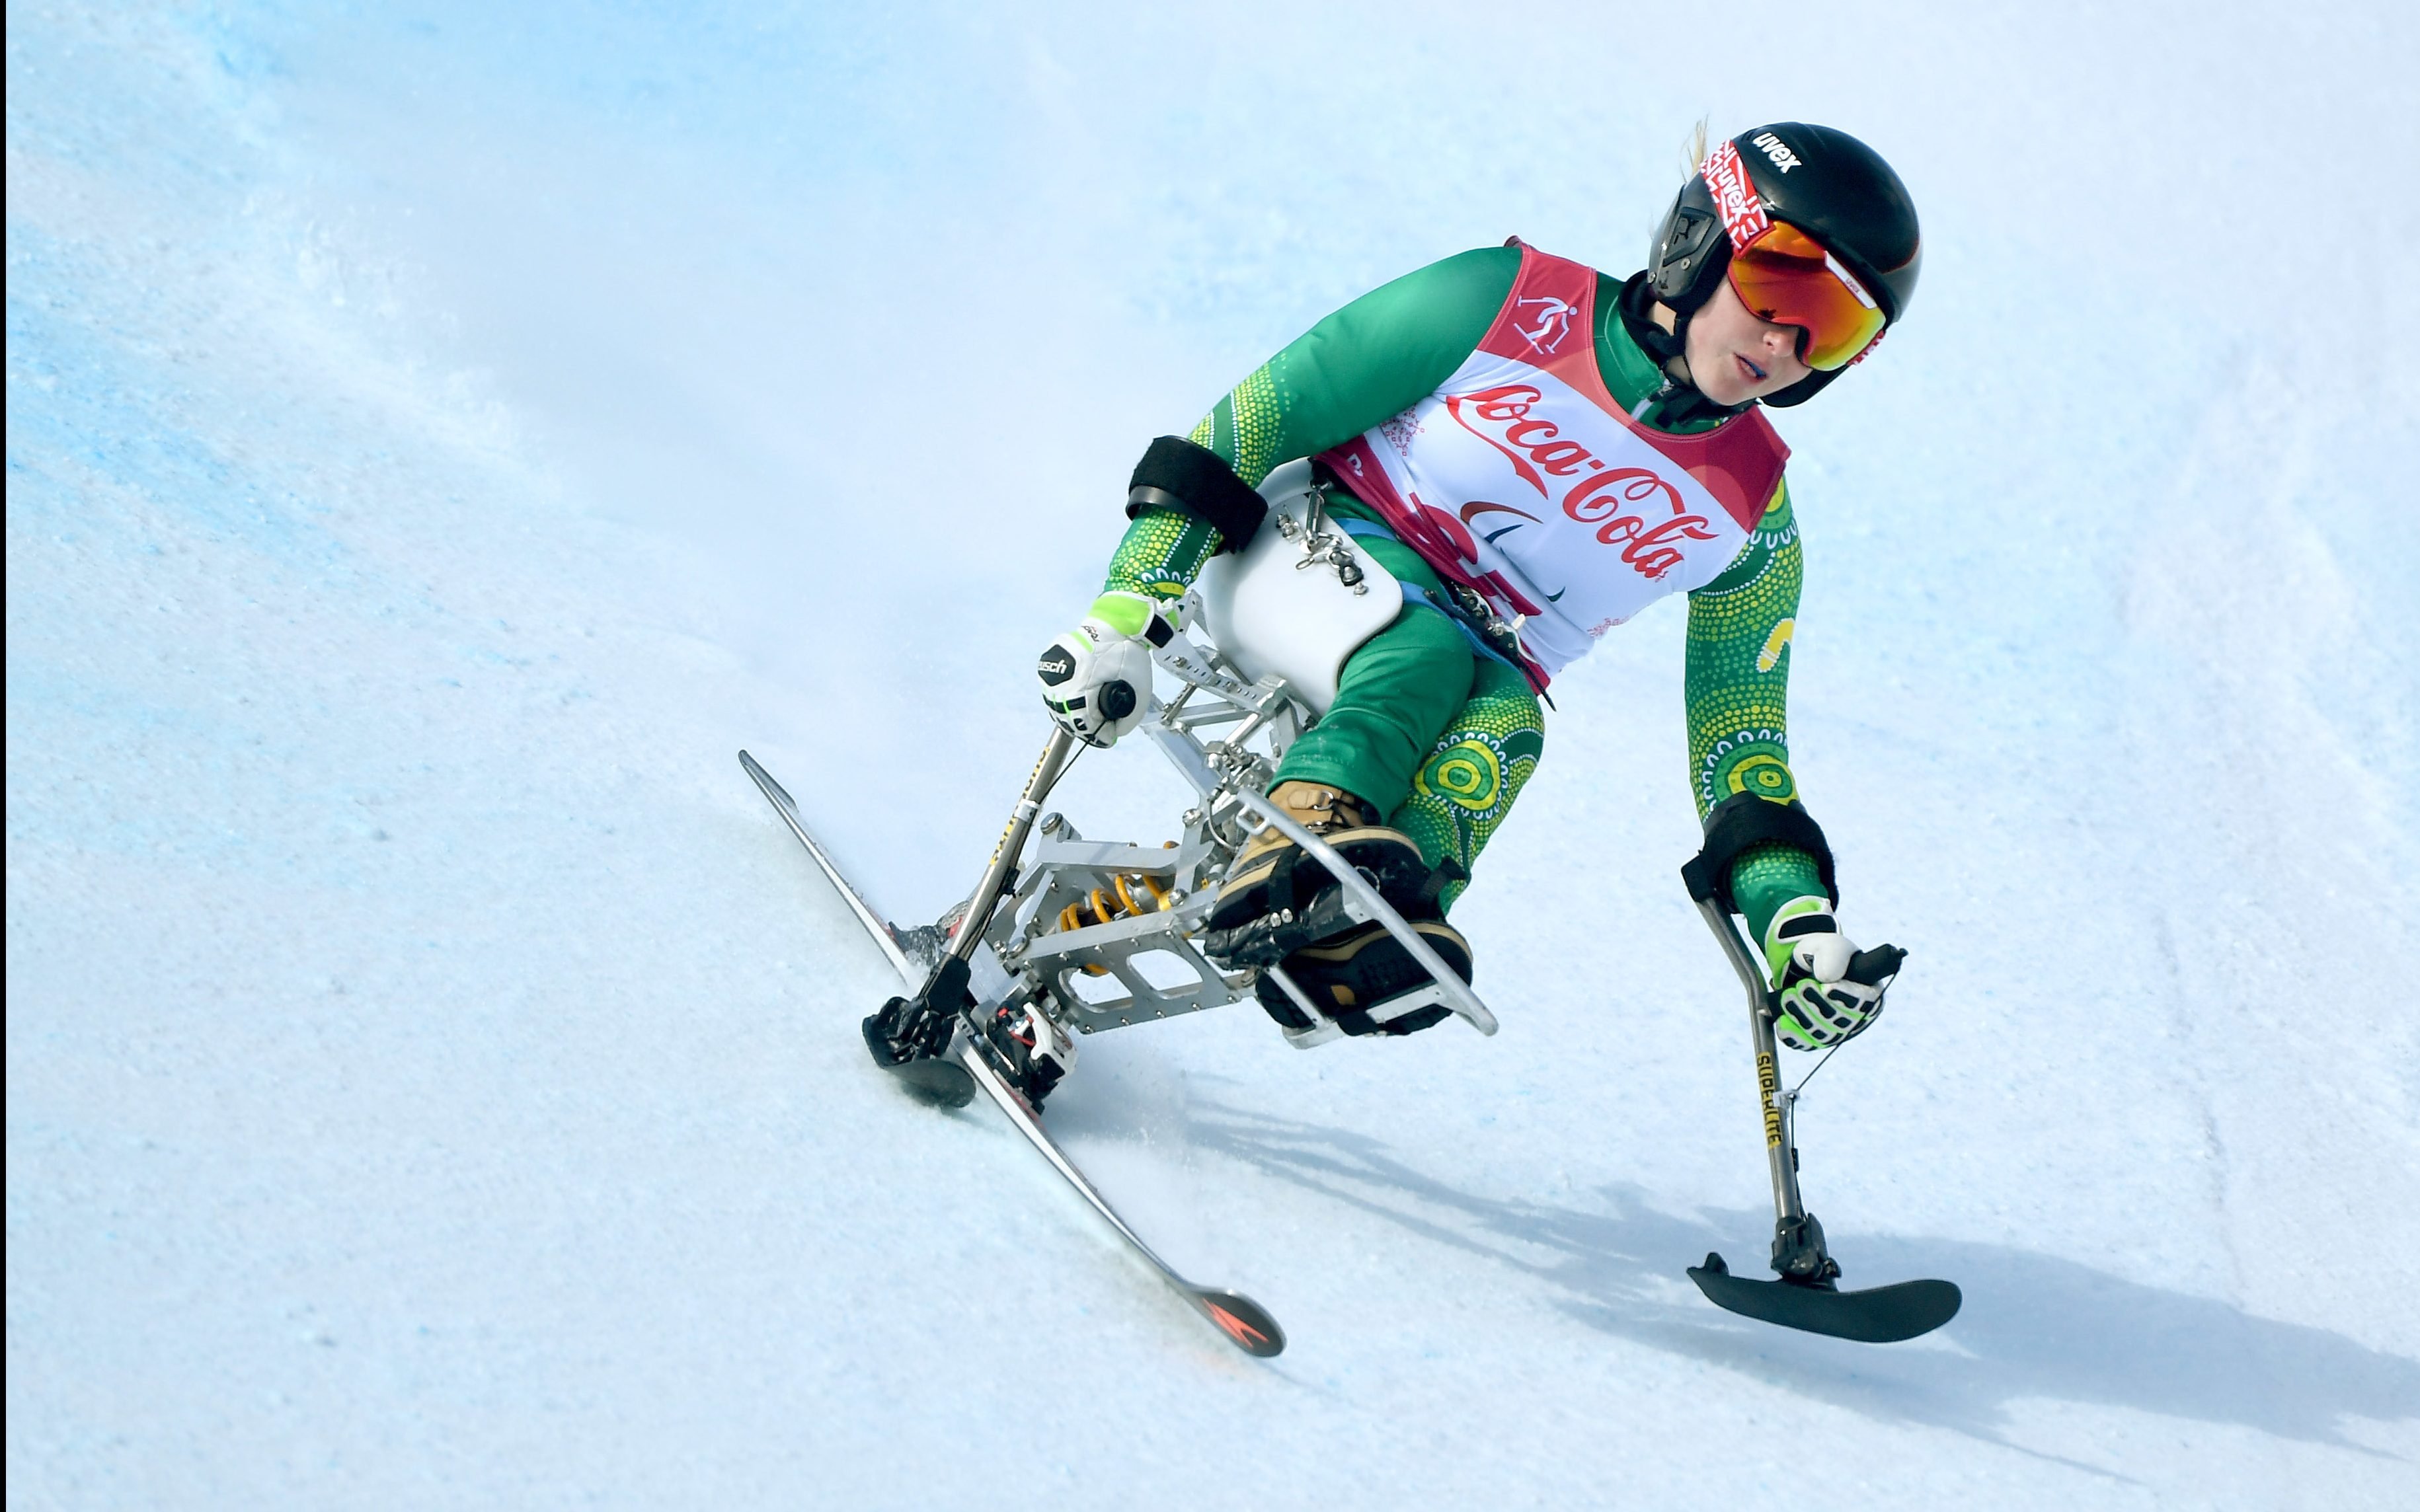 Pendergast gives her all in first Paralympic downhill race